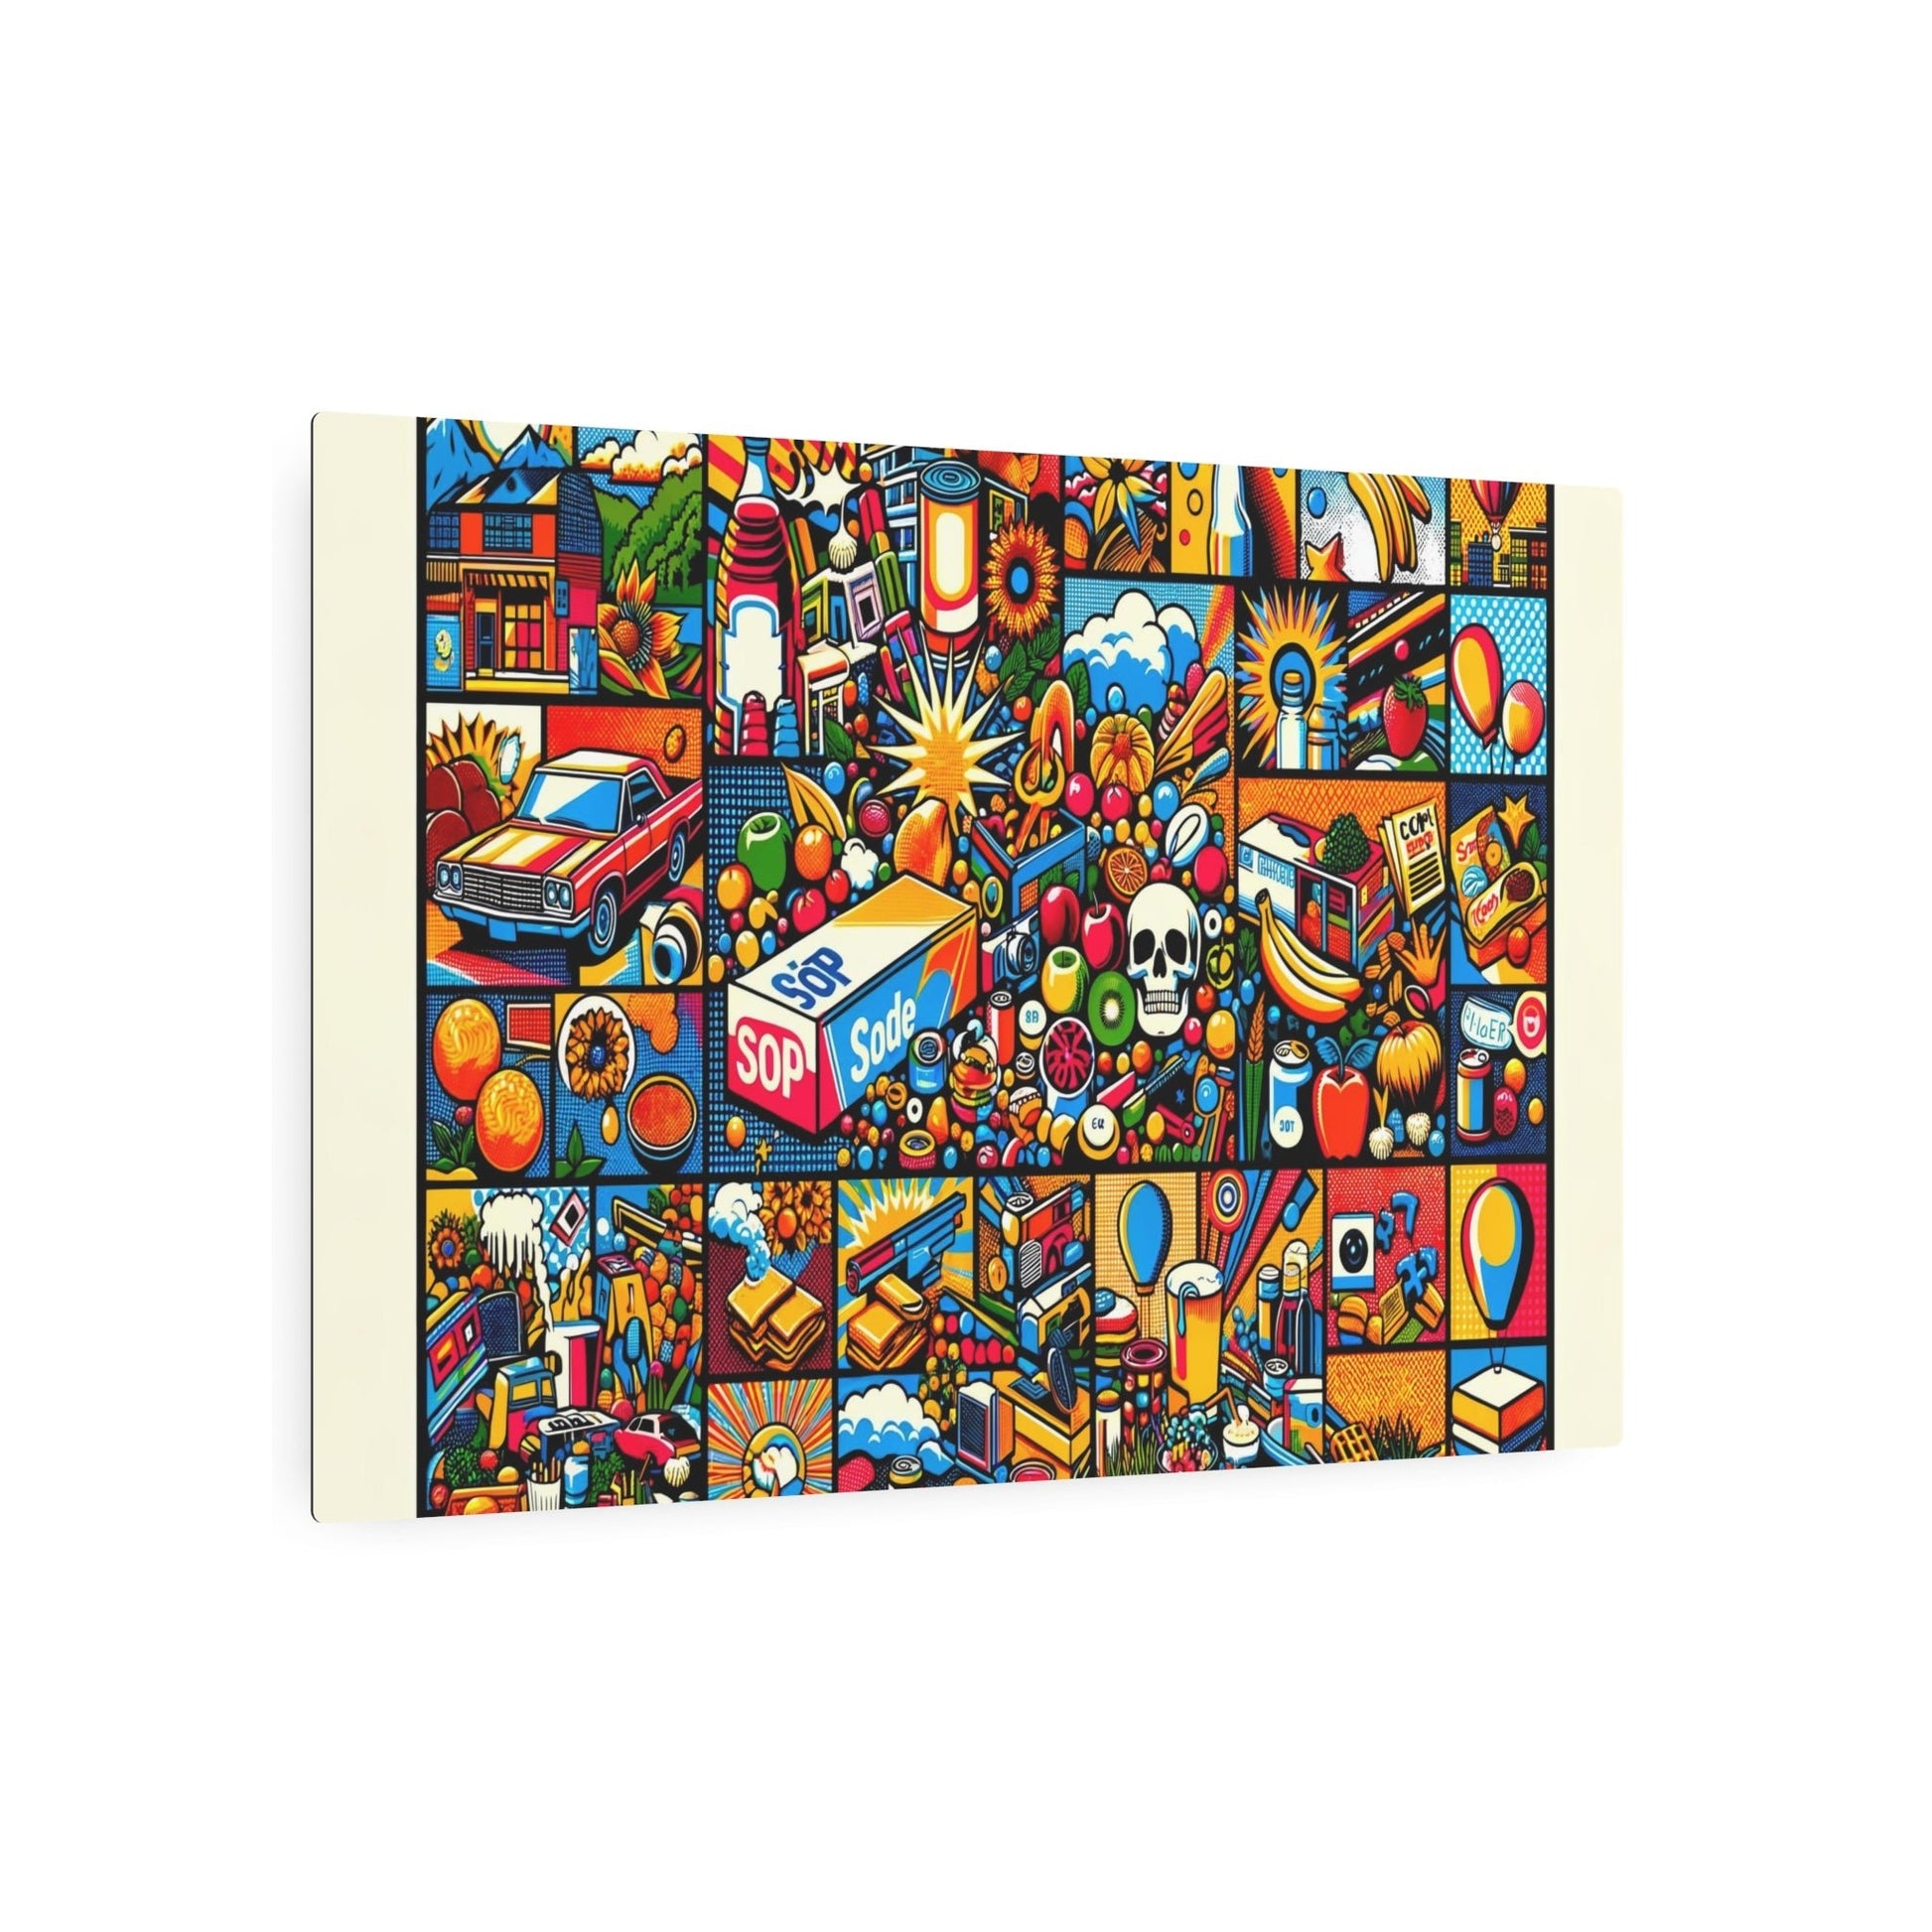 Metal Poster Art | "Vibrant Pop Art Inspired Masterpiece - Modern Contemporary Style with Bold Imagery & Color Saturation"